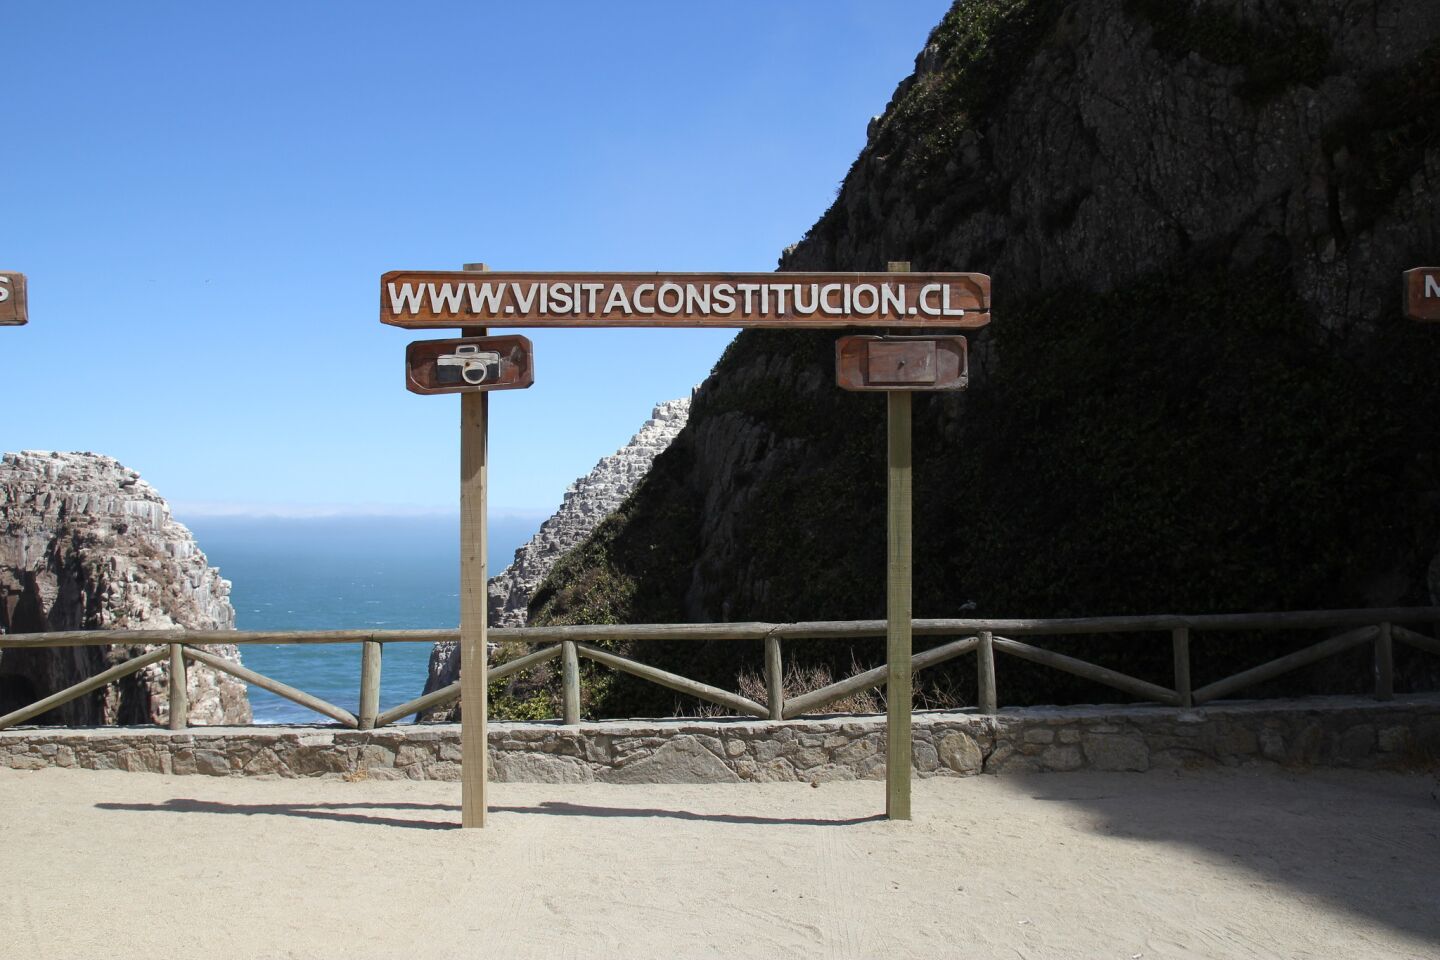 A sign encourages visitors to the coastal areas, which are frequented on the weekends -- when Constitución residents go beyond the limits of their town in search of a little open space.